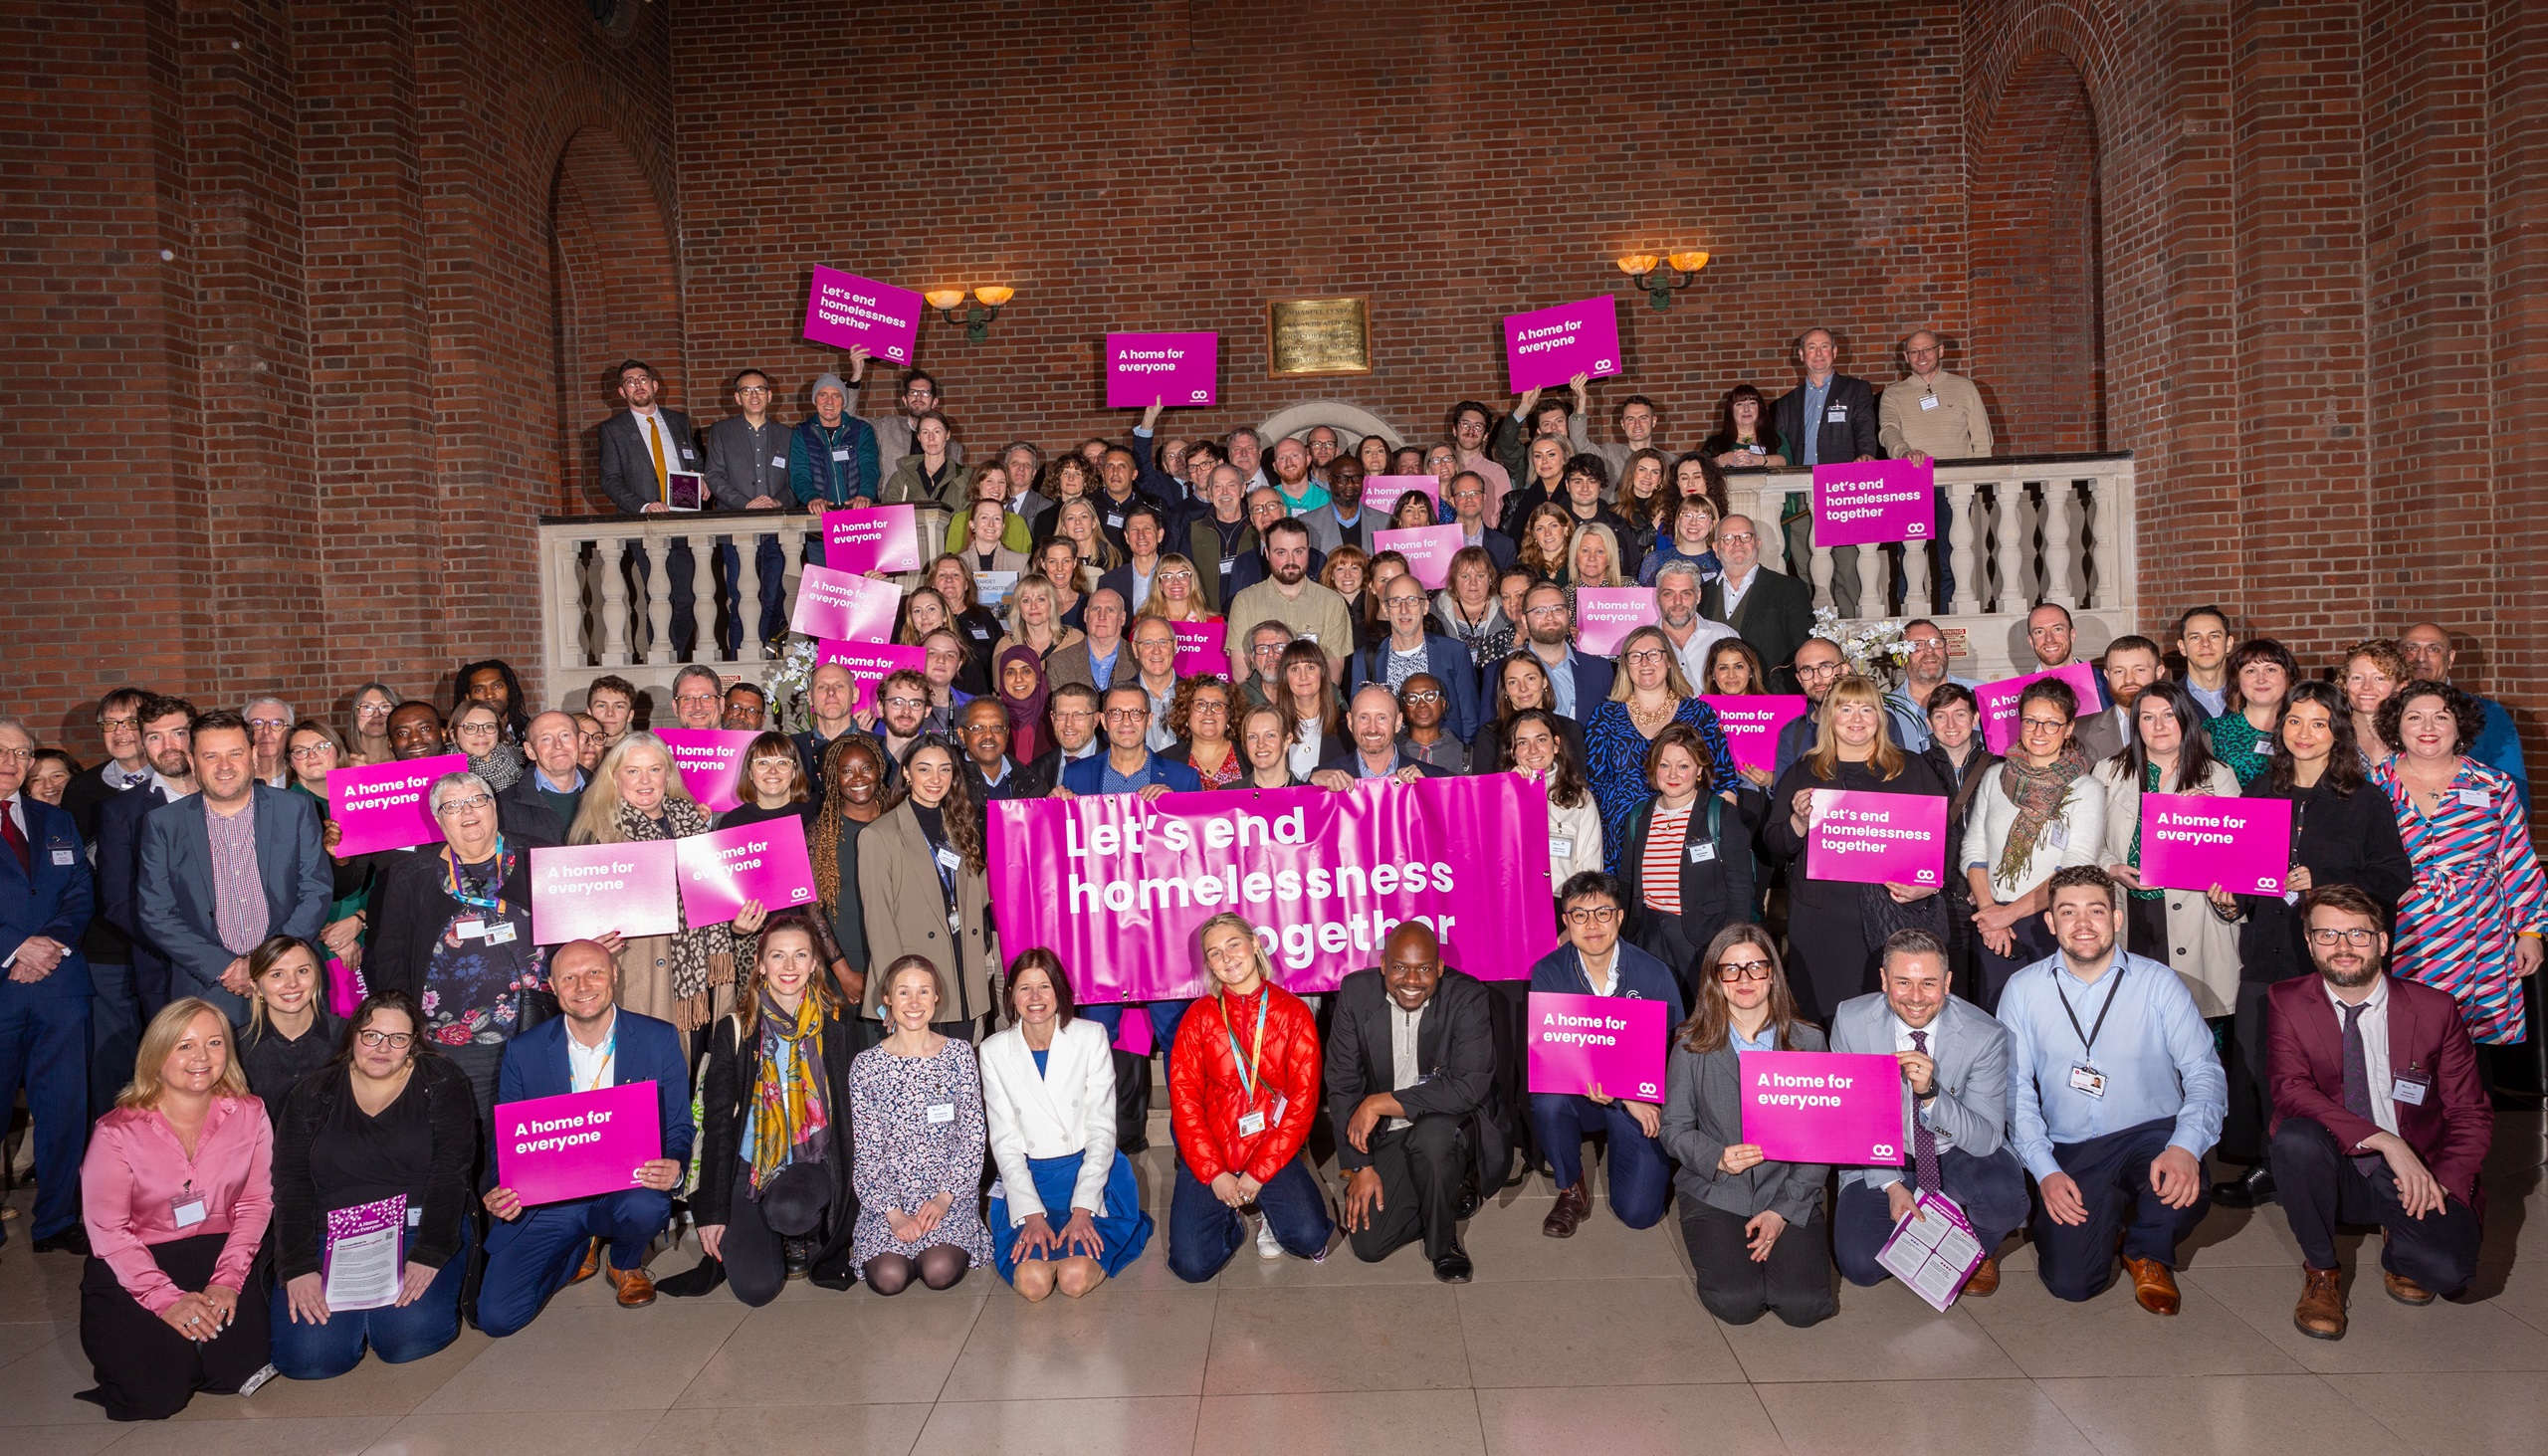 A large group of people representation the organisations attending lobby day, holding signs which say 'A Home for Everyone'